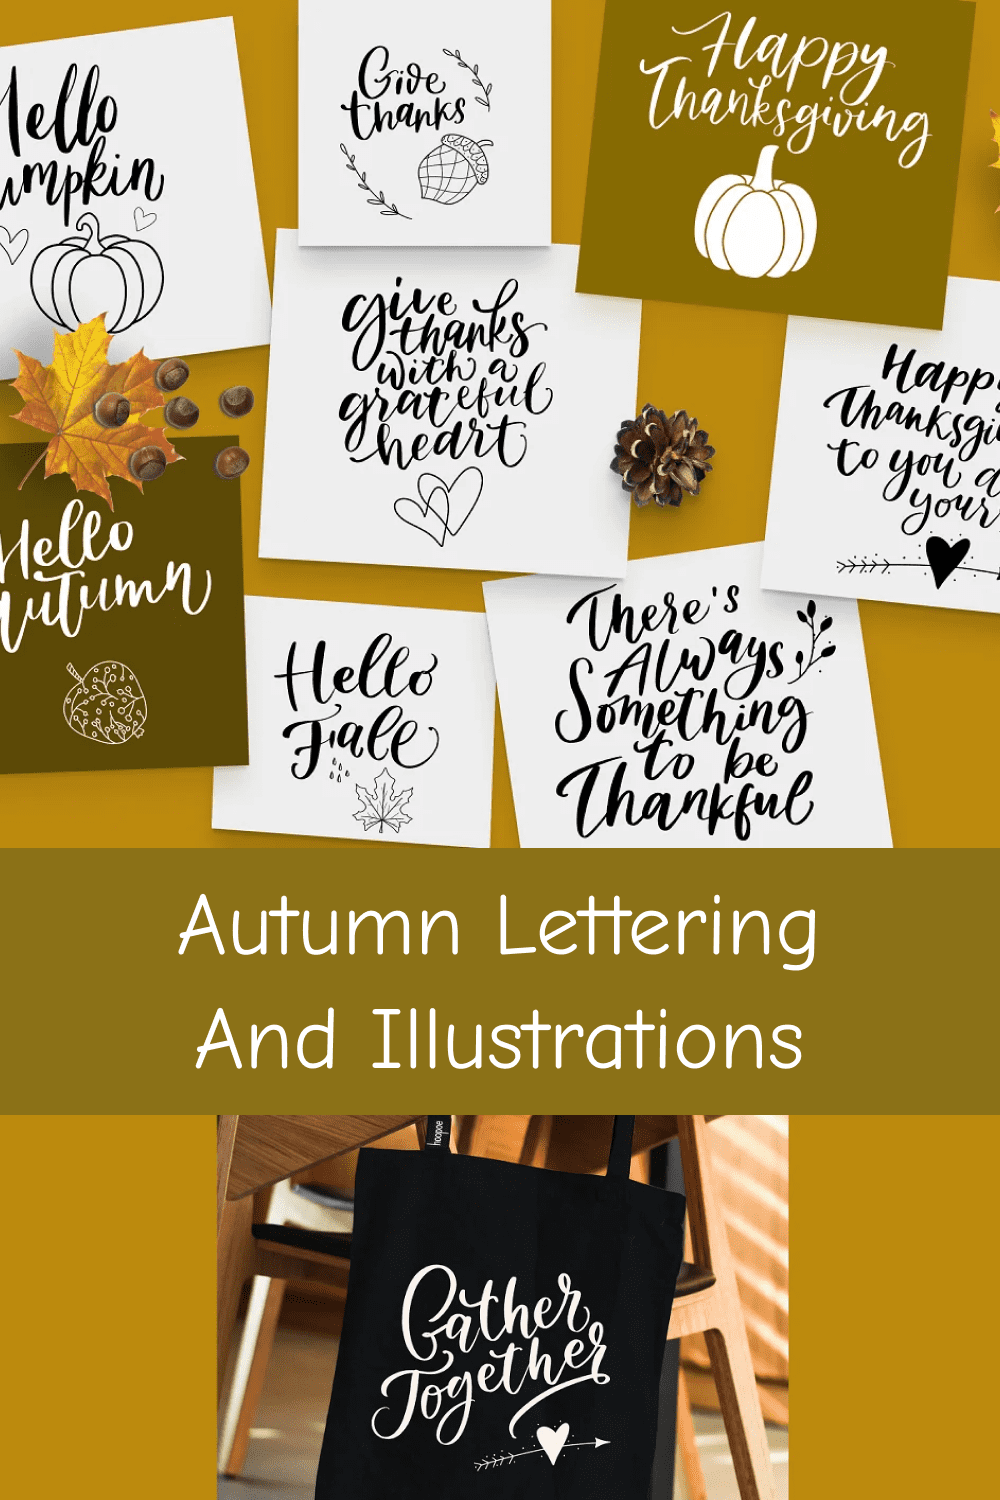 Autumn Lettering and Illustrations.